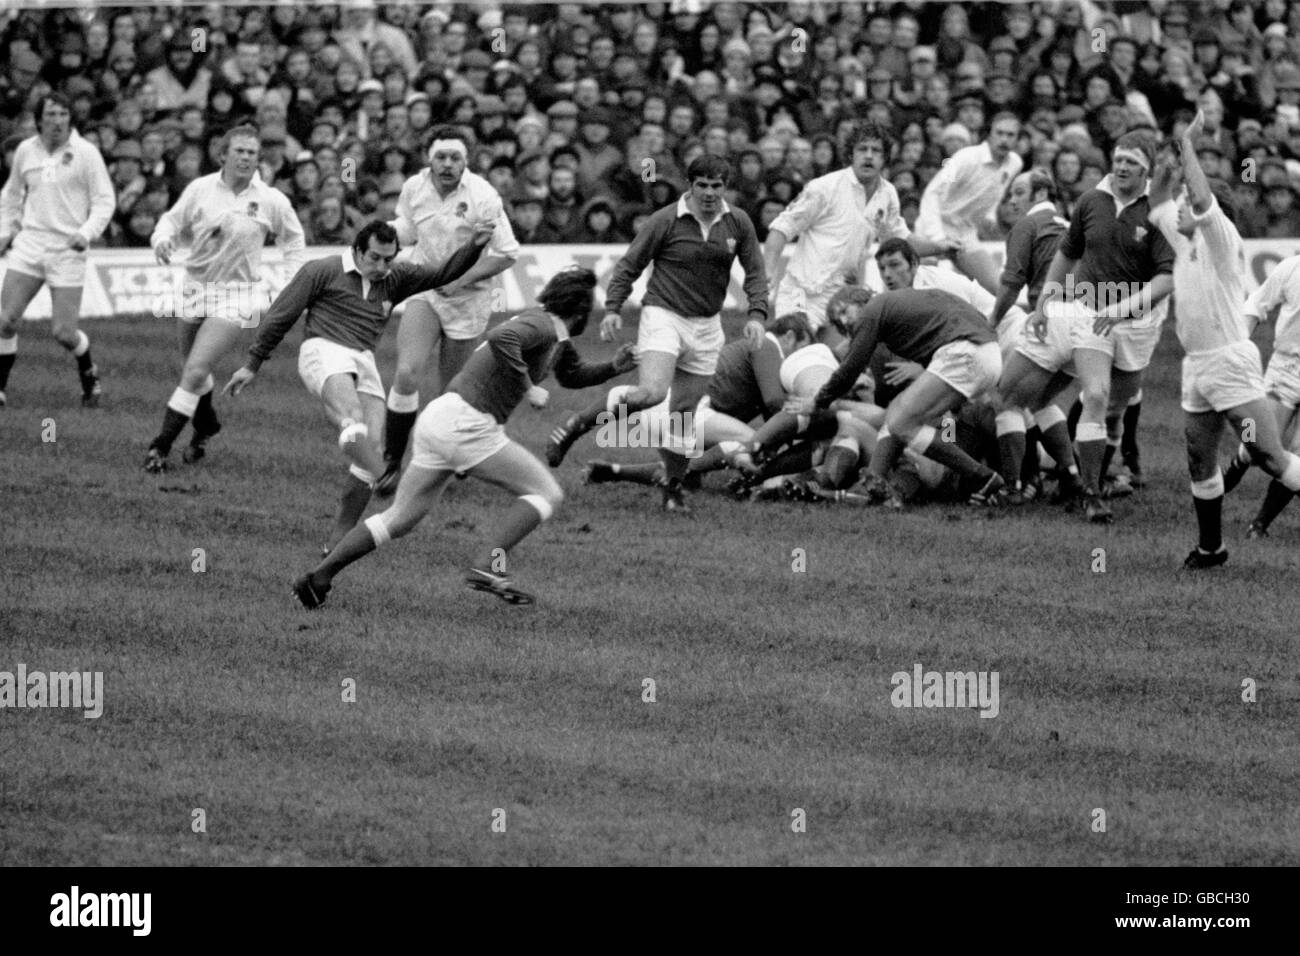 Wales' Gareth Edwards (third l) kicks downfield, watched by teammates JJ Williams (fifth l), Bobby Windsor (sixth l), Derek Quinnell (fifth r), Terry Cobner (third r) and Geoff Wheel (second r), and England's Barry Corless (l), Peter Wheeler (second l), Bill Beaumont (fourth l), John Scott (sixth r), Nigel Horton (fourth r) and Barry Nelmes (r) Stock Photo